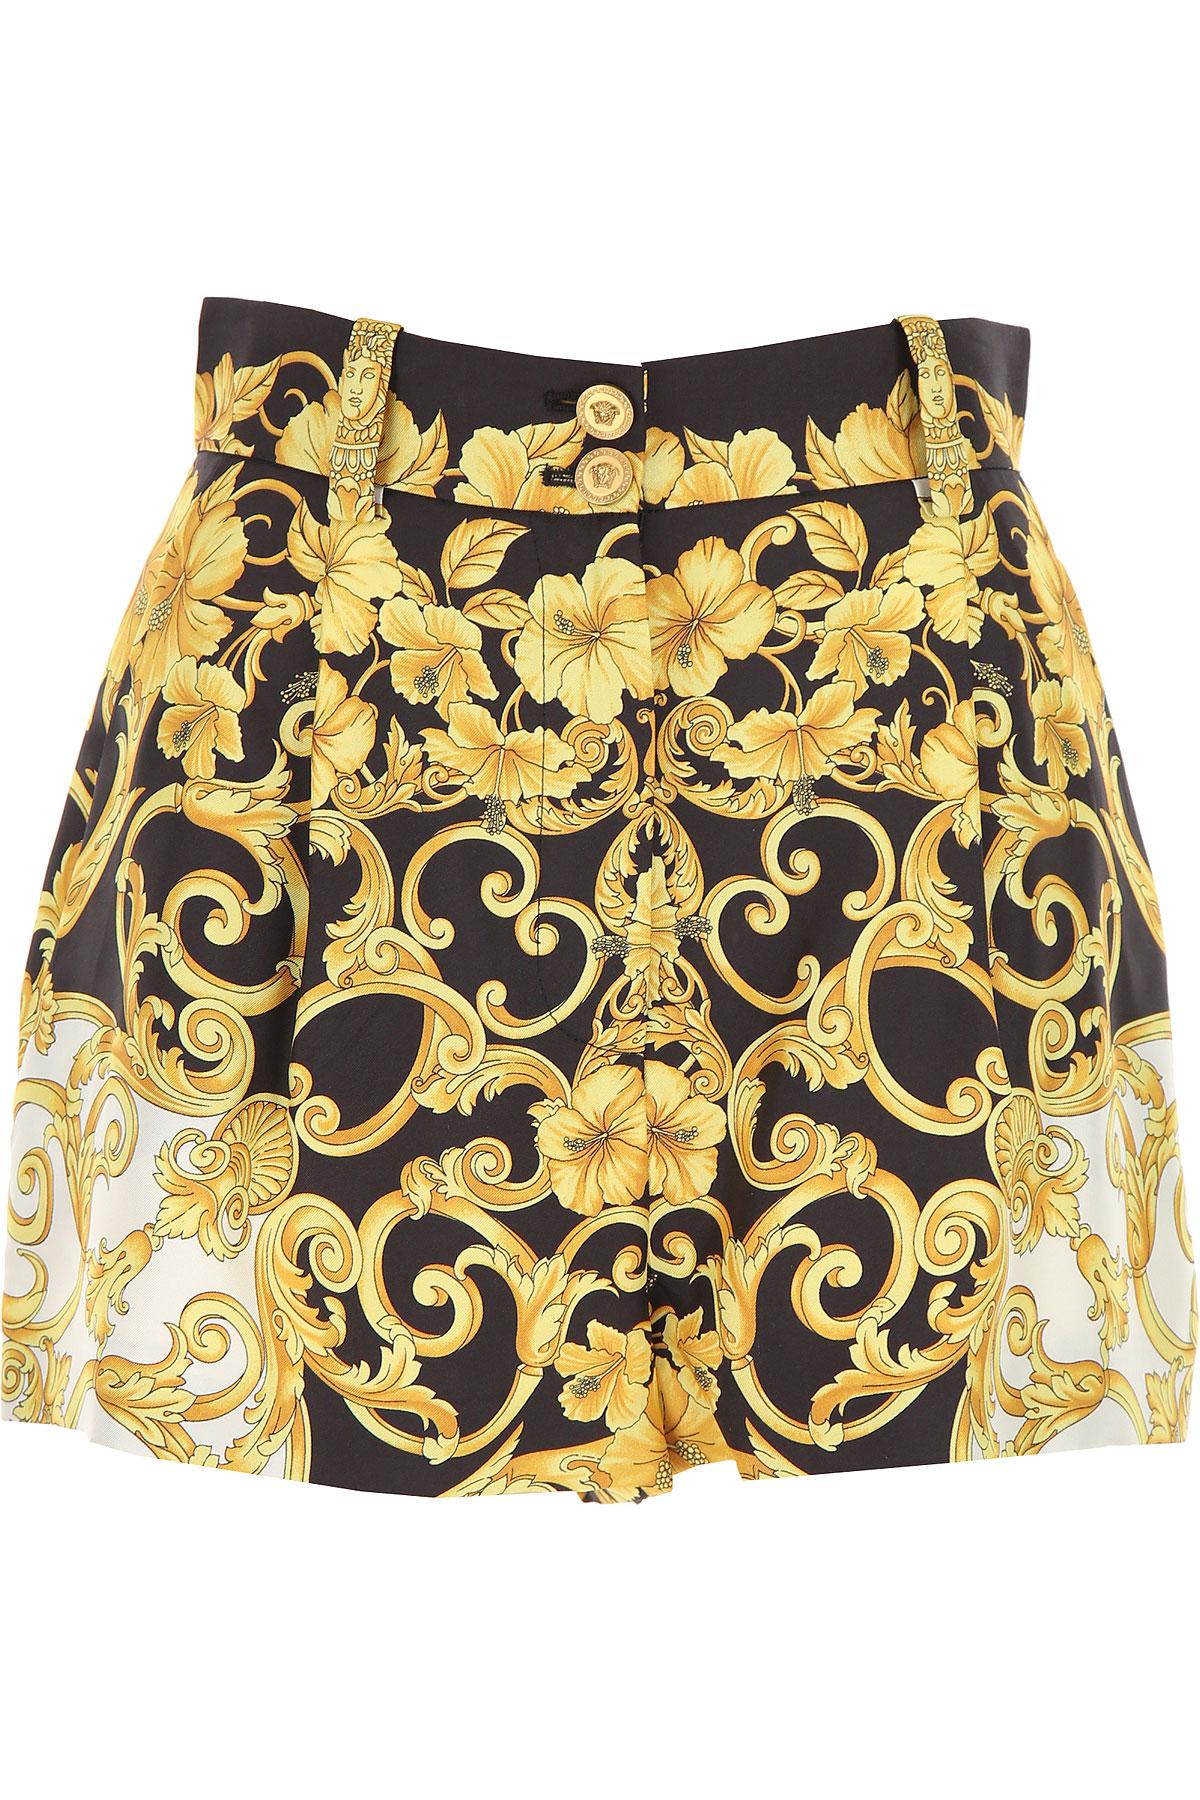 Versace Shorts For Women On Sale in Black - Lyst